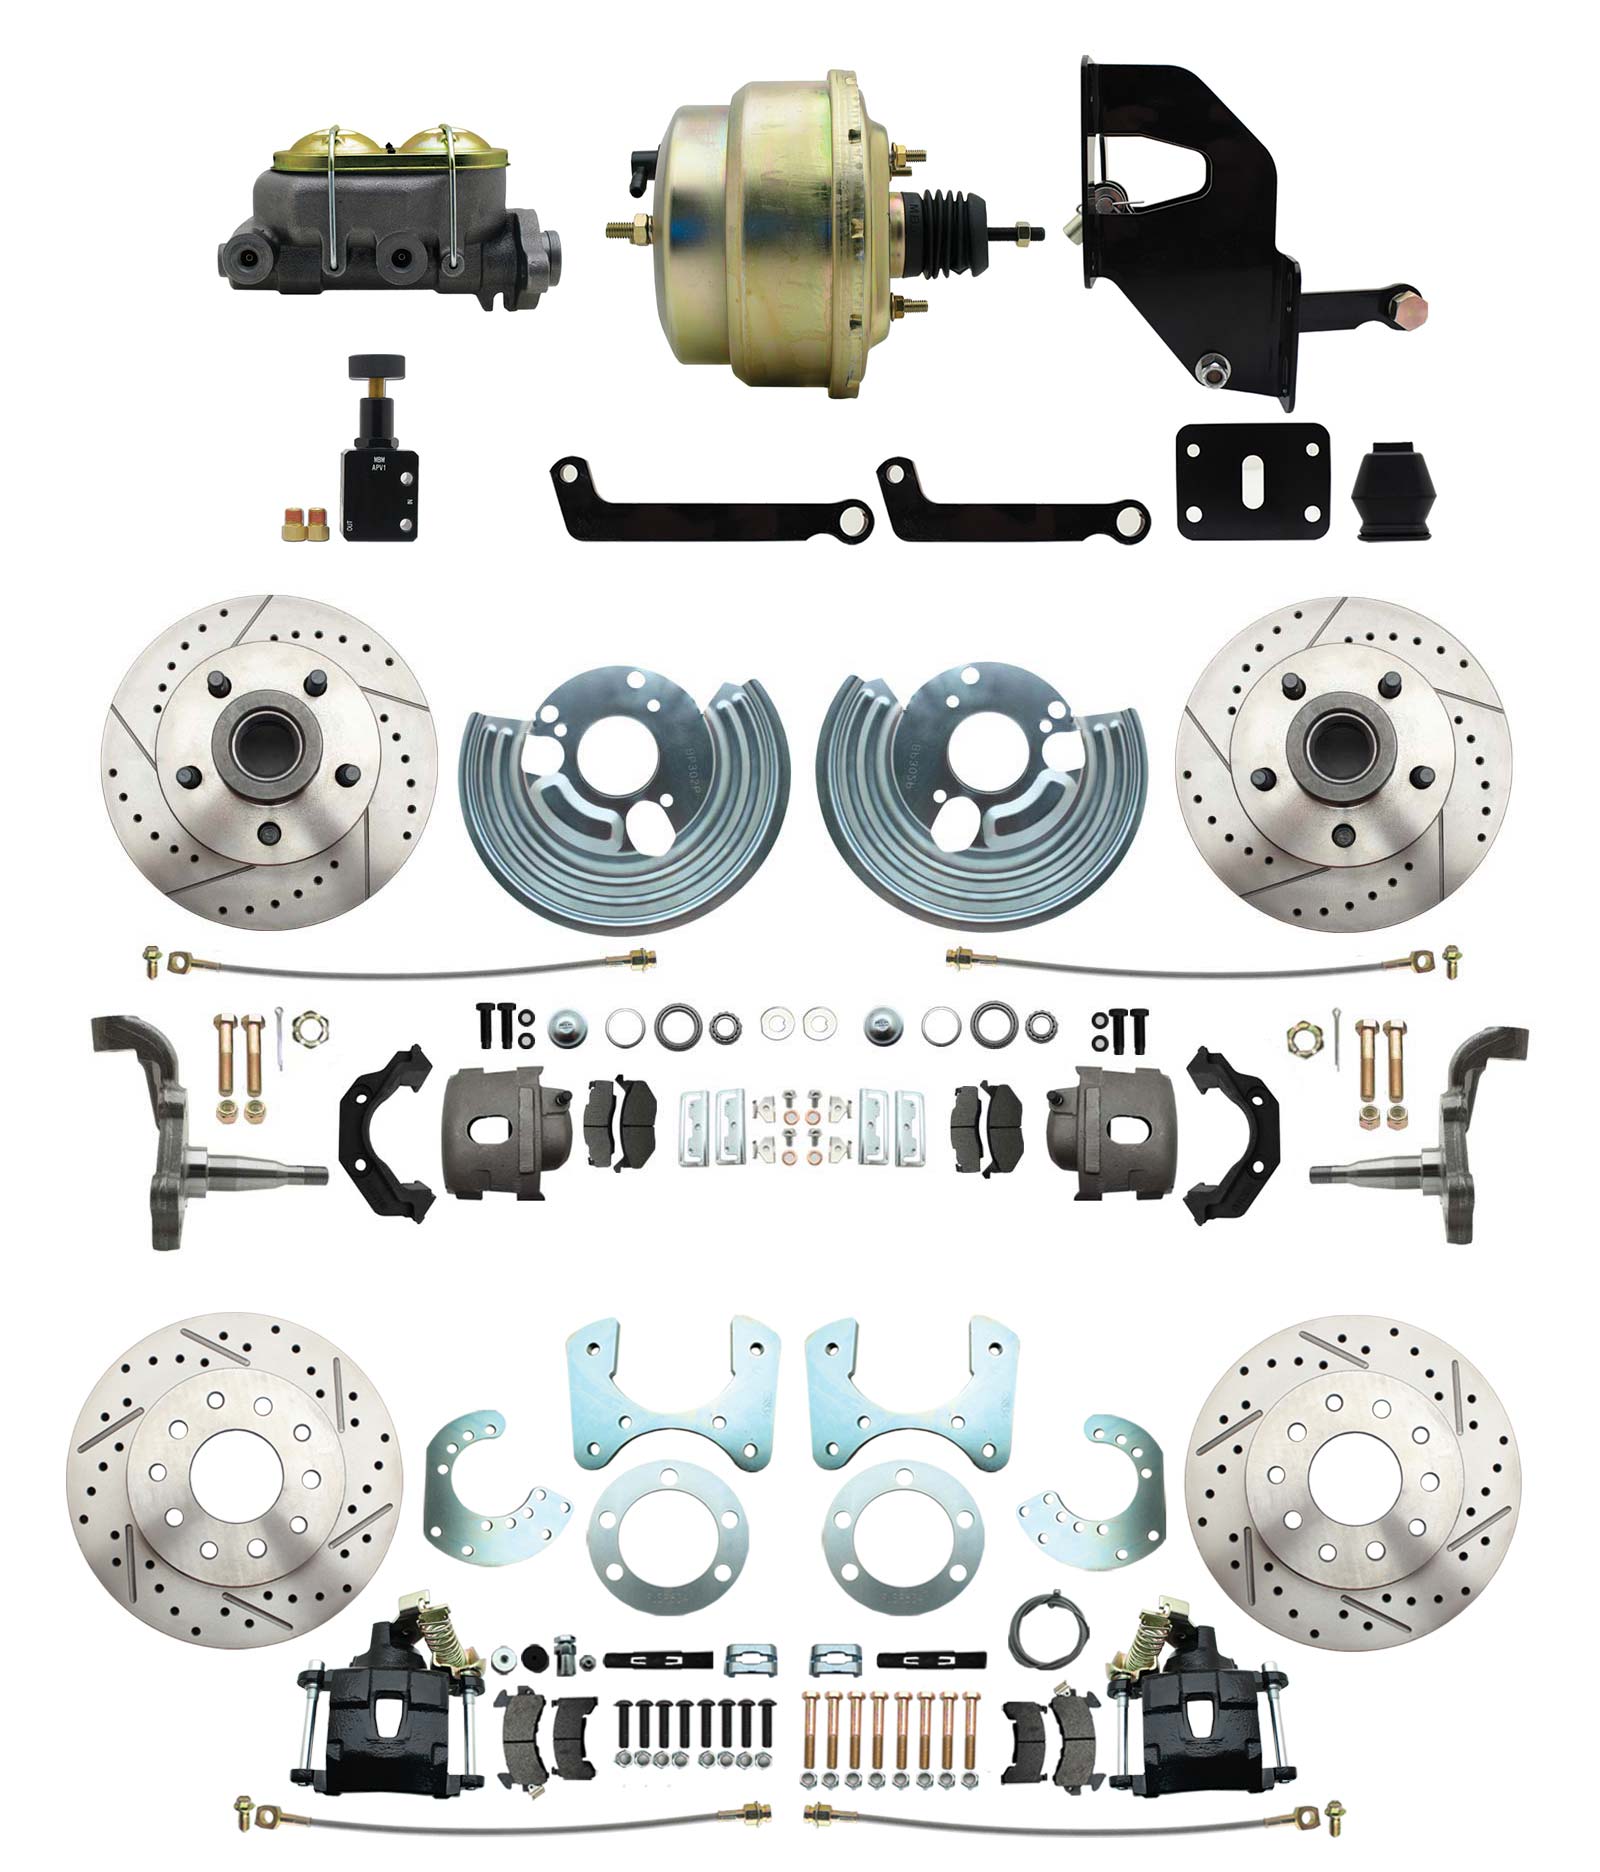 1962-2 Mopar B & E Body Front & Rear Disc Brake Conversion Kit W/ Drilled & Slotted Rotors ( Charger, Challenger, Coronet) W/ 8 Dual Zinc Booster Conversion Kit W/ Adjustable Valve